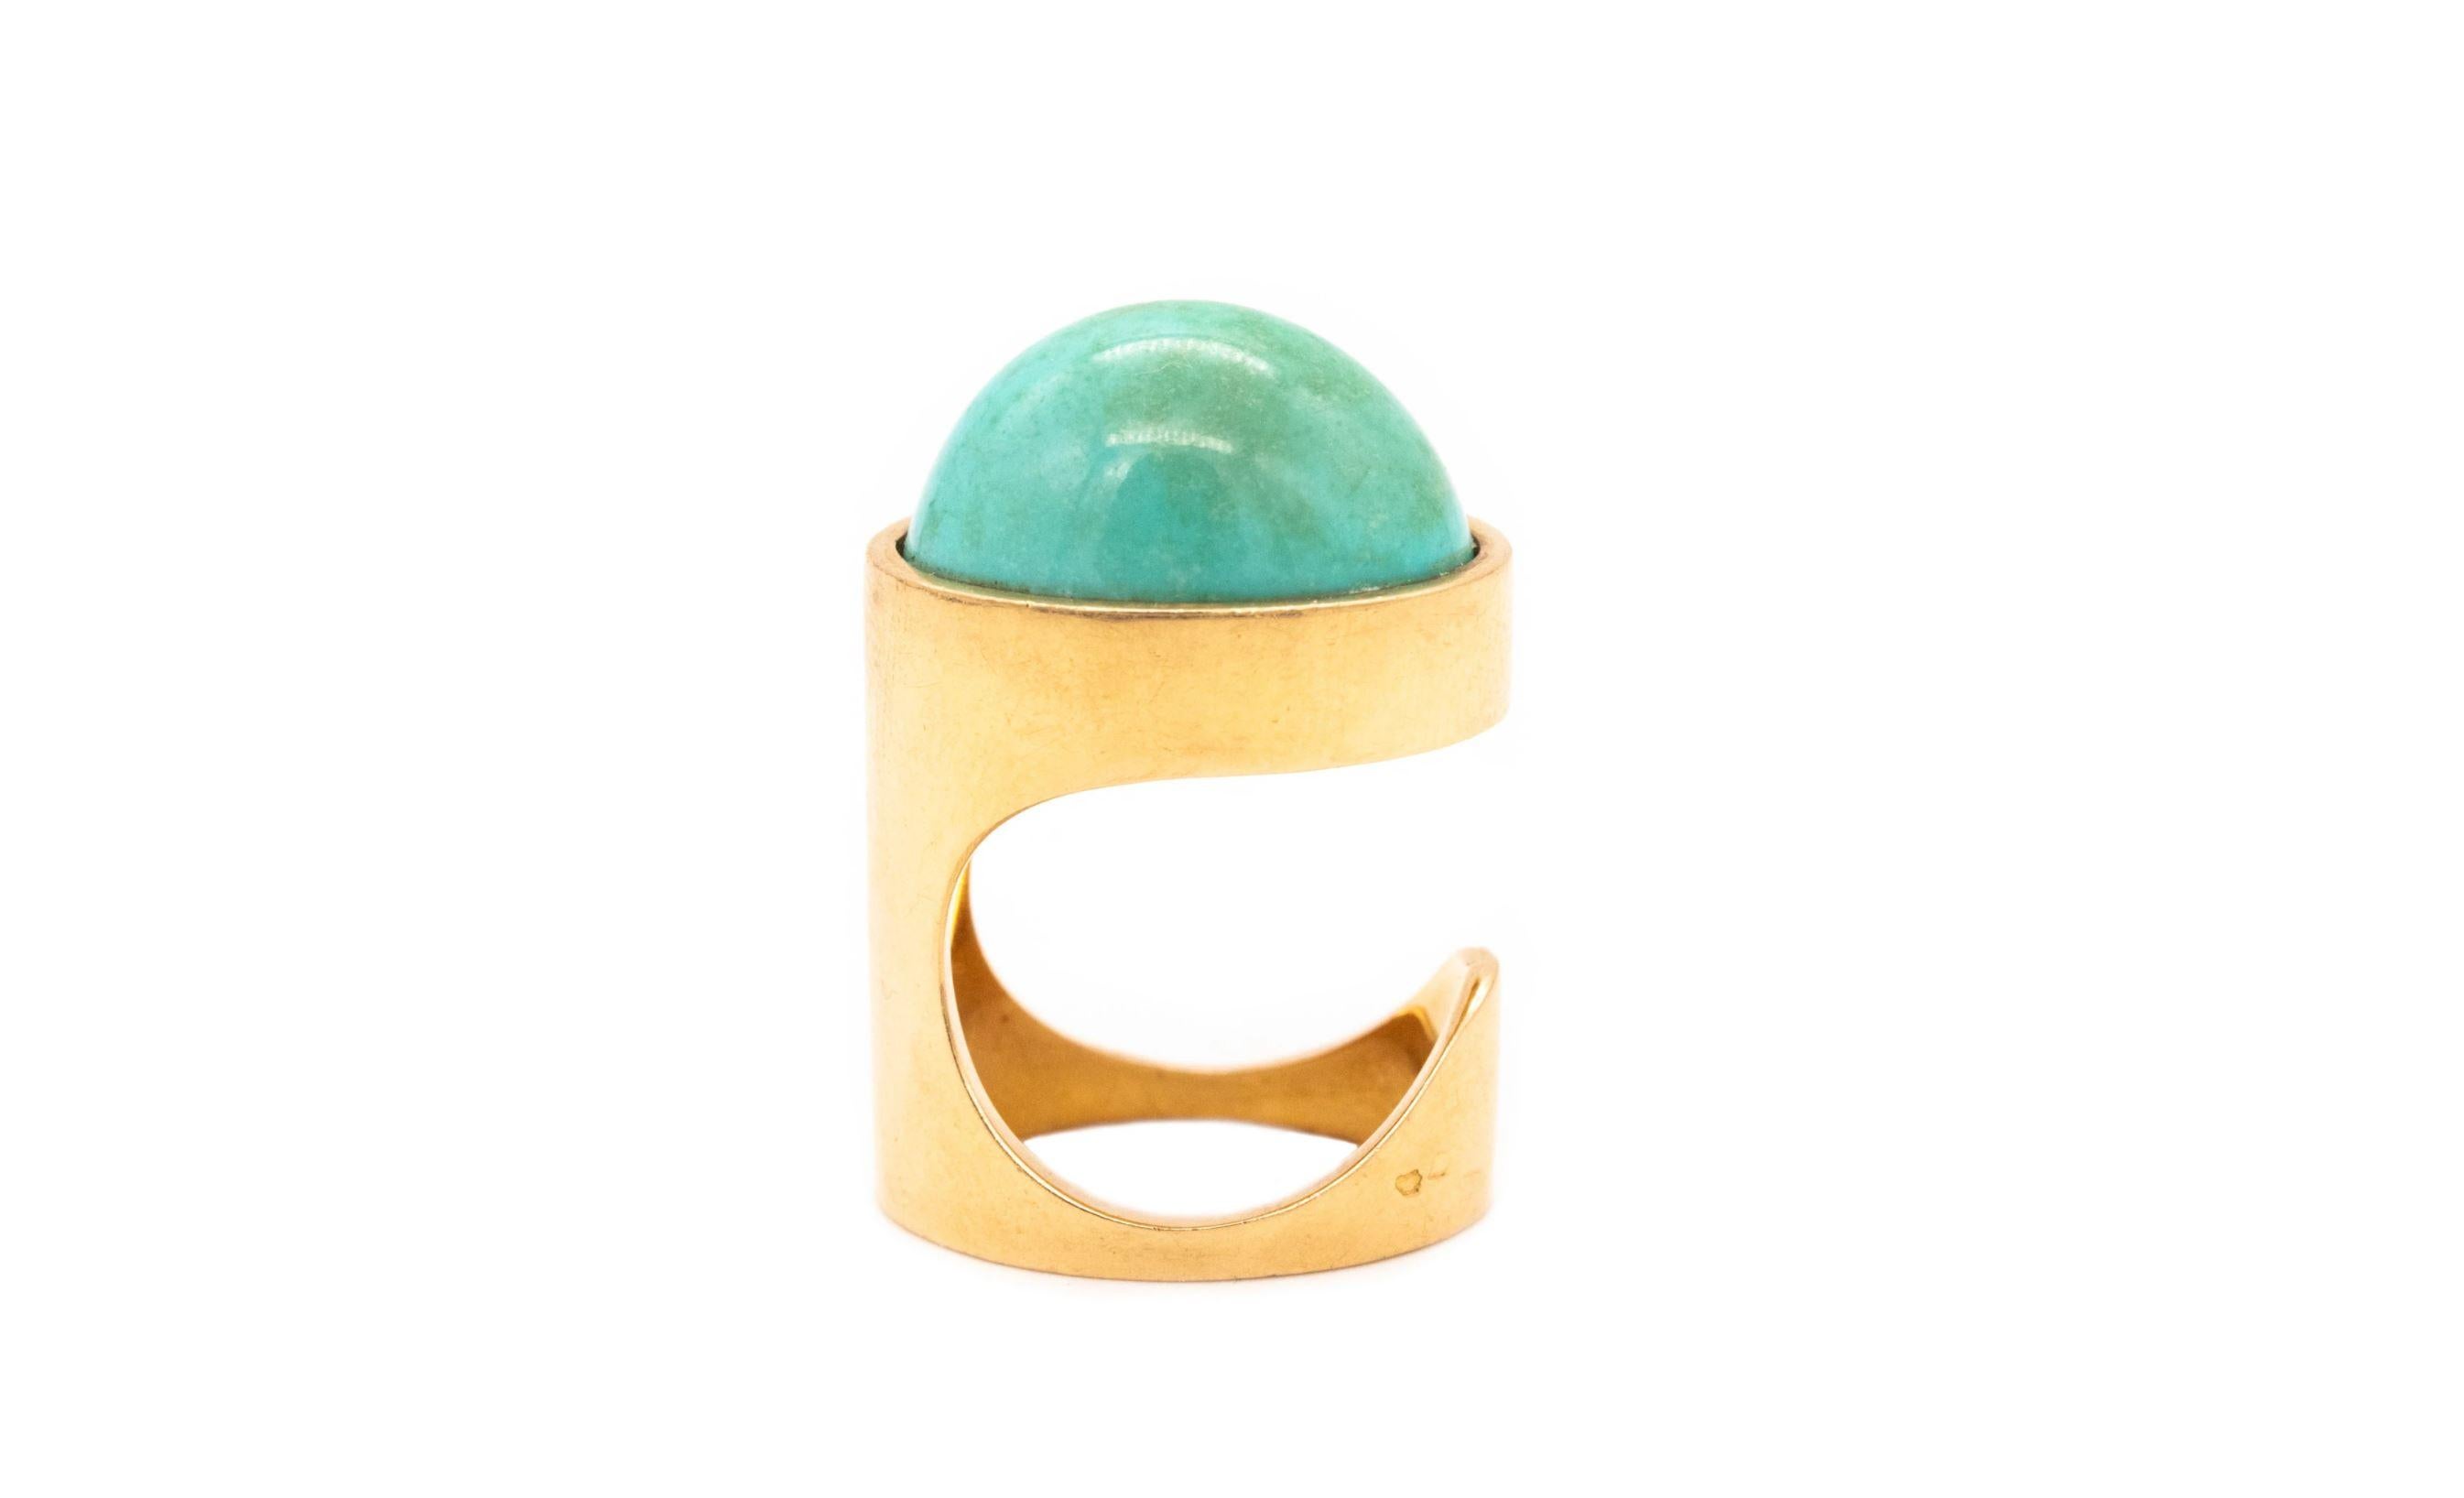 Dinh Van Paris For Pierre Cardin 1970 Geometric Ring 18Kt Yellow Gold Turquoise 2